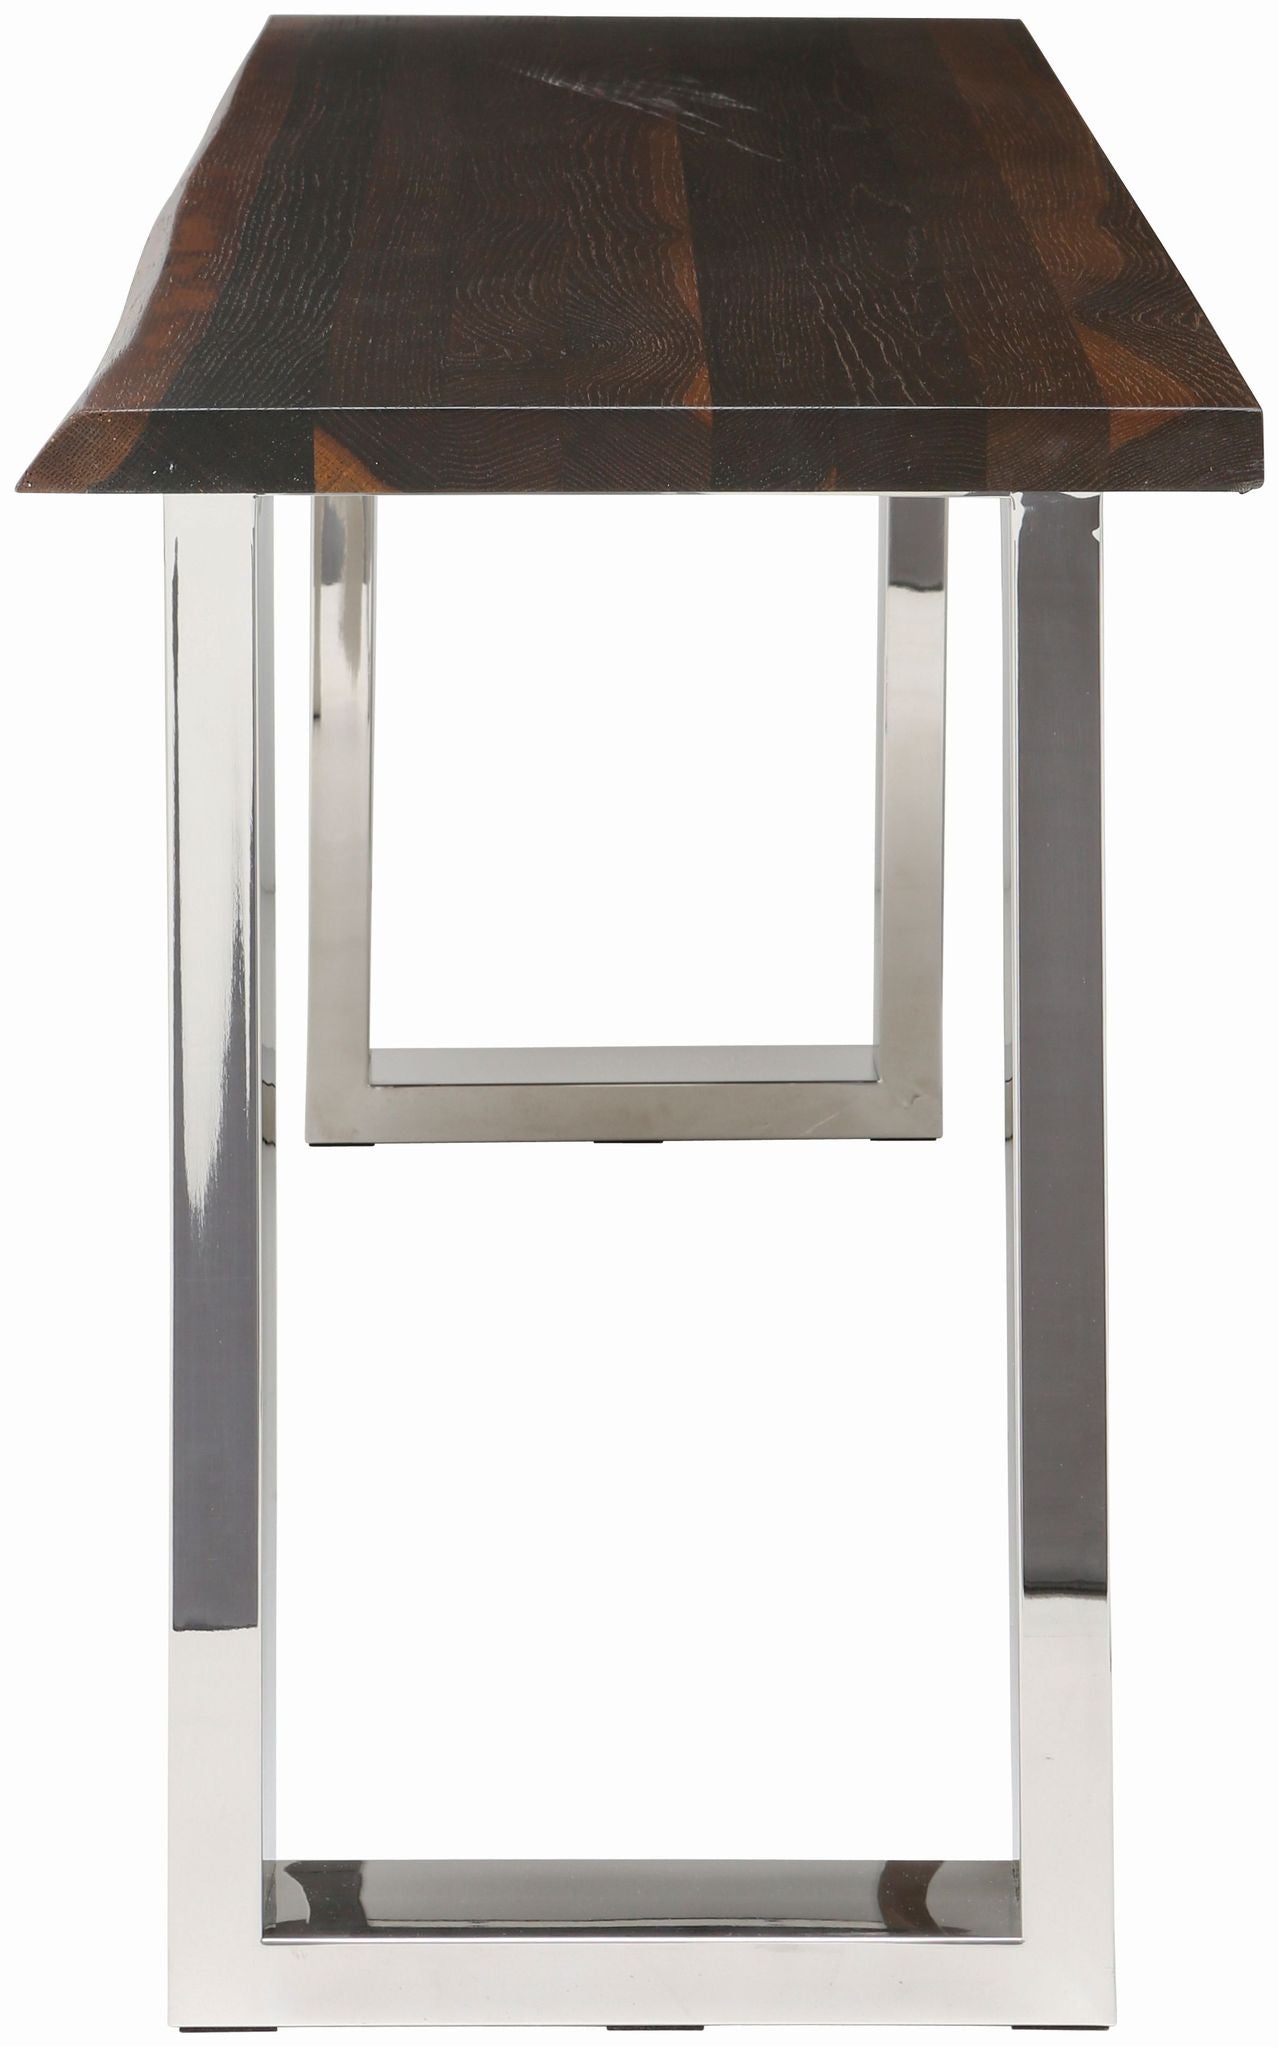 Load image into Gallery viewer, Lyon Seared Wood Console Table TABLE Nuevo     Four Hands, Burke Decor, Mid Century Modern Furniture, Old Bones Furniture Company, Old Bones Co, Modern Mid Century, Designer Furniture, https://www.oldbonesco.com/
